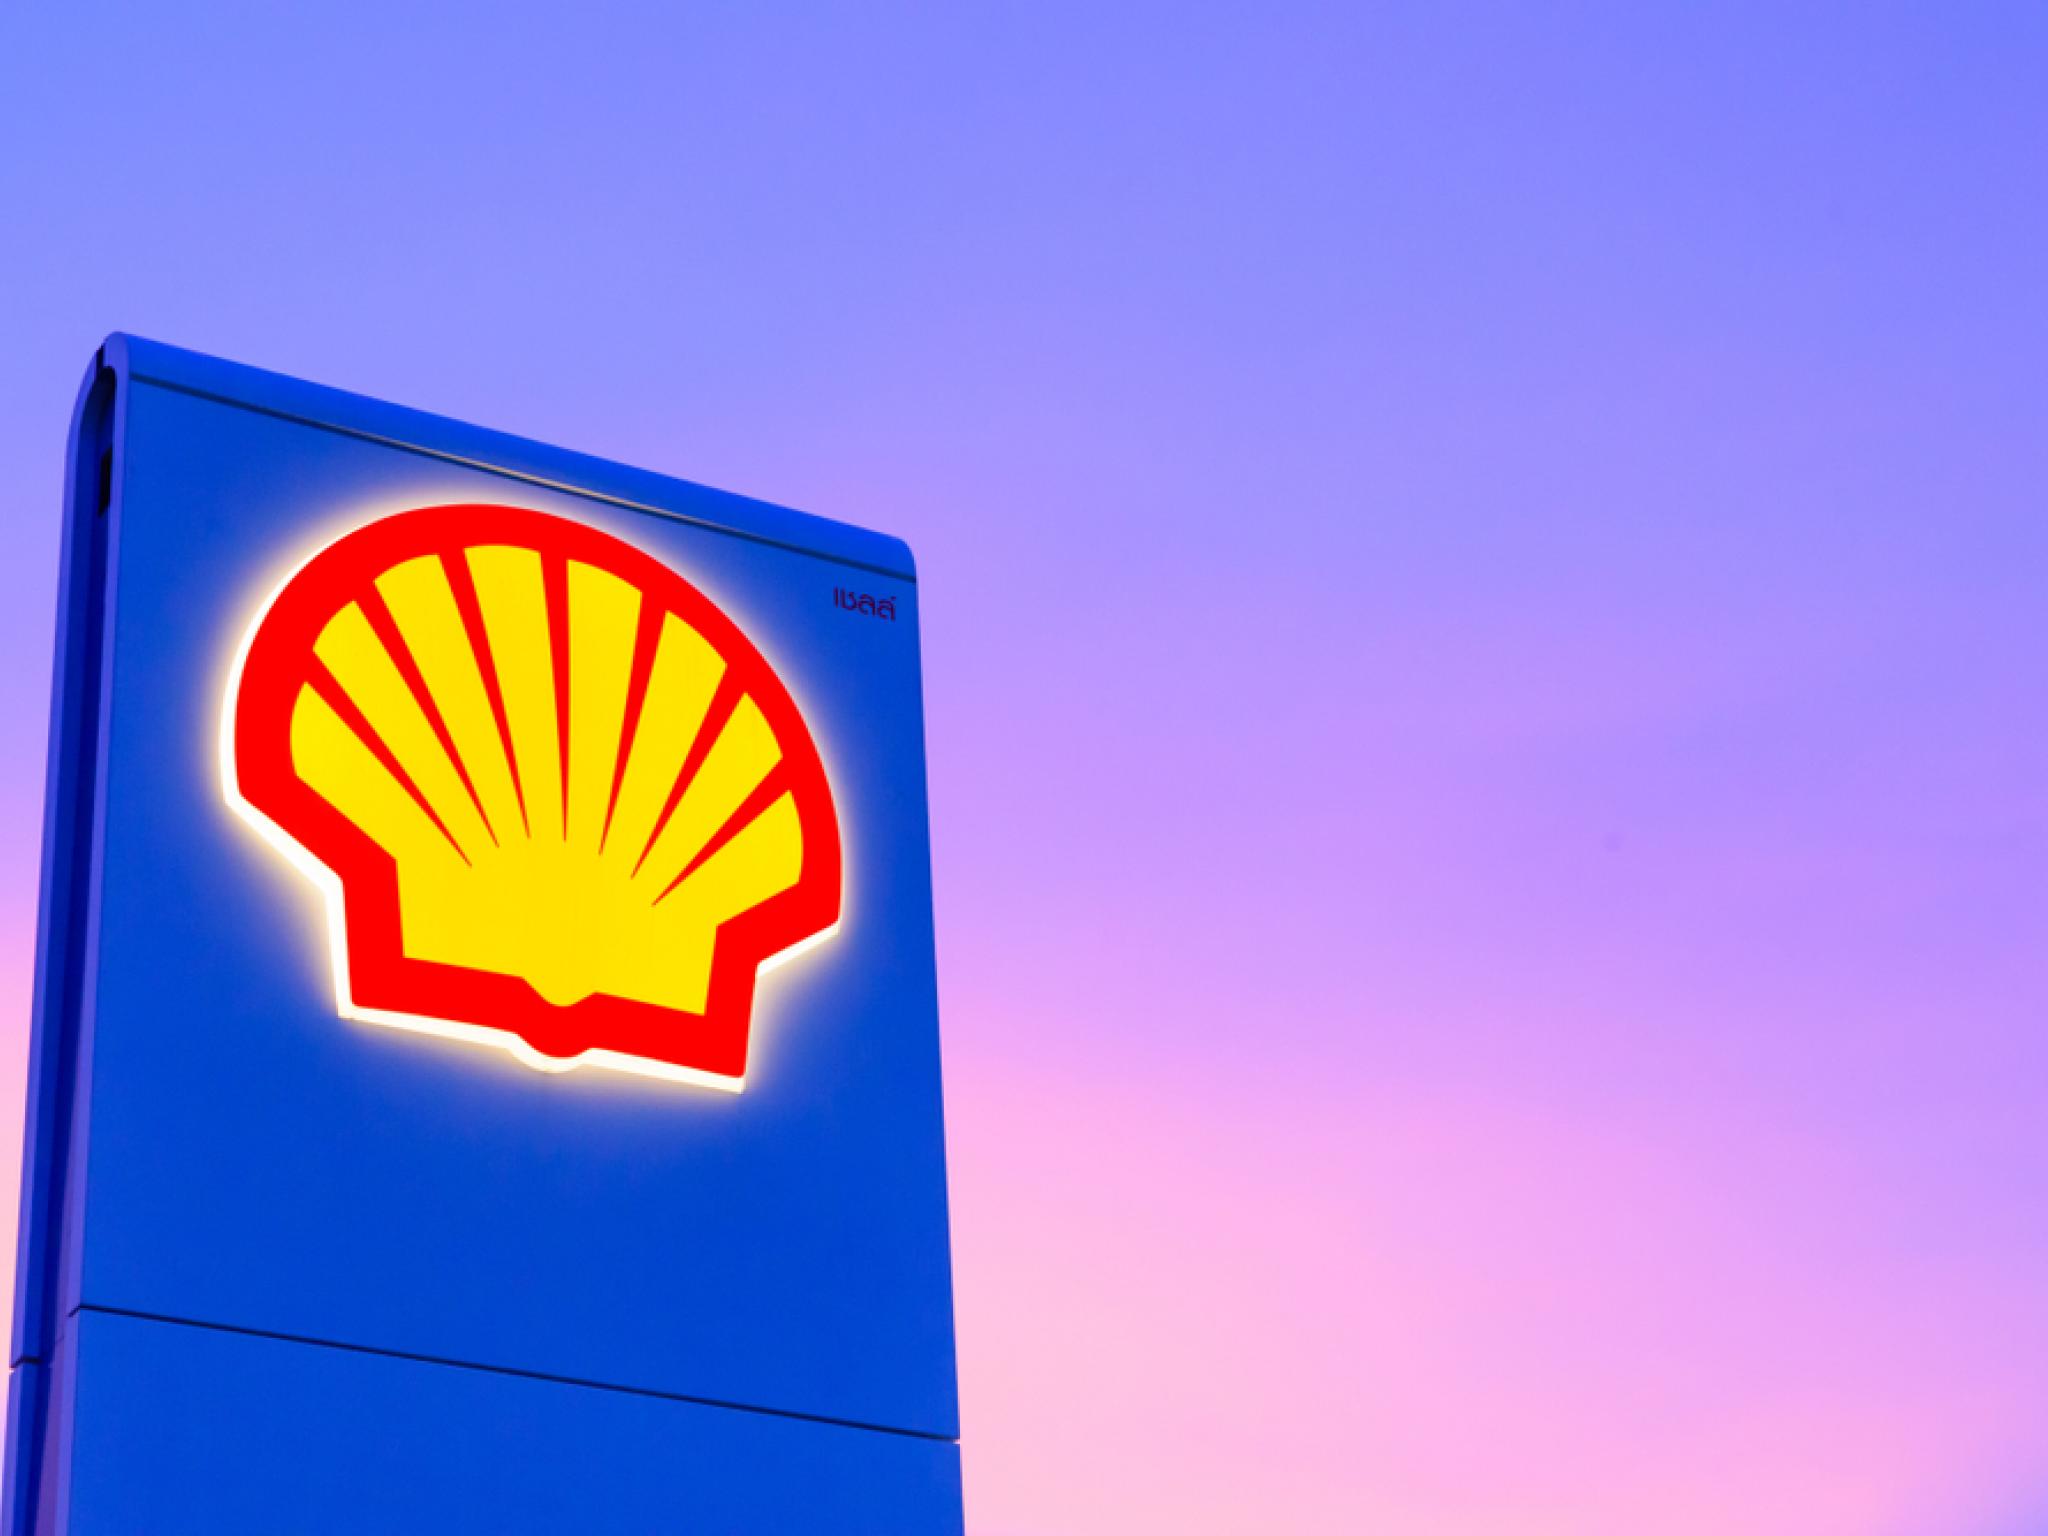  shell-absorbs-charges-pauses-project-q2-outlook-dims-with-impairments-and-biofuels-halt 